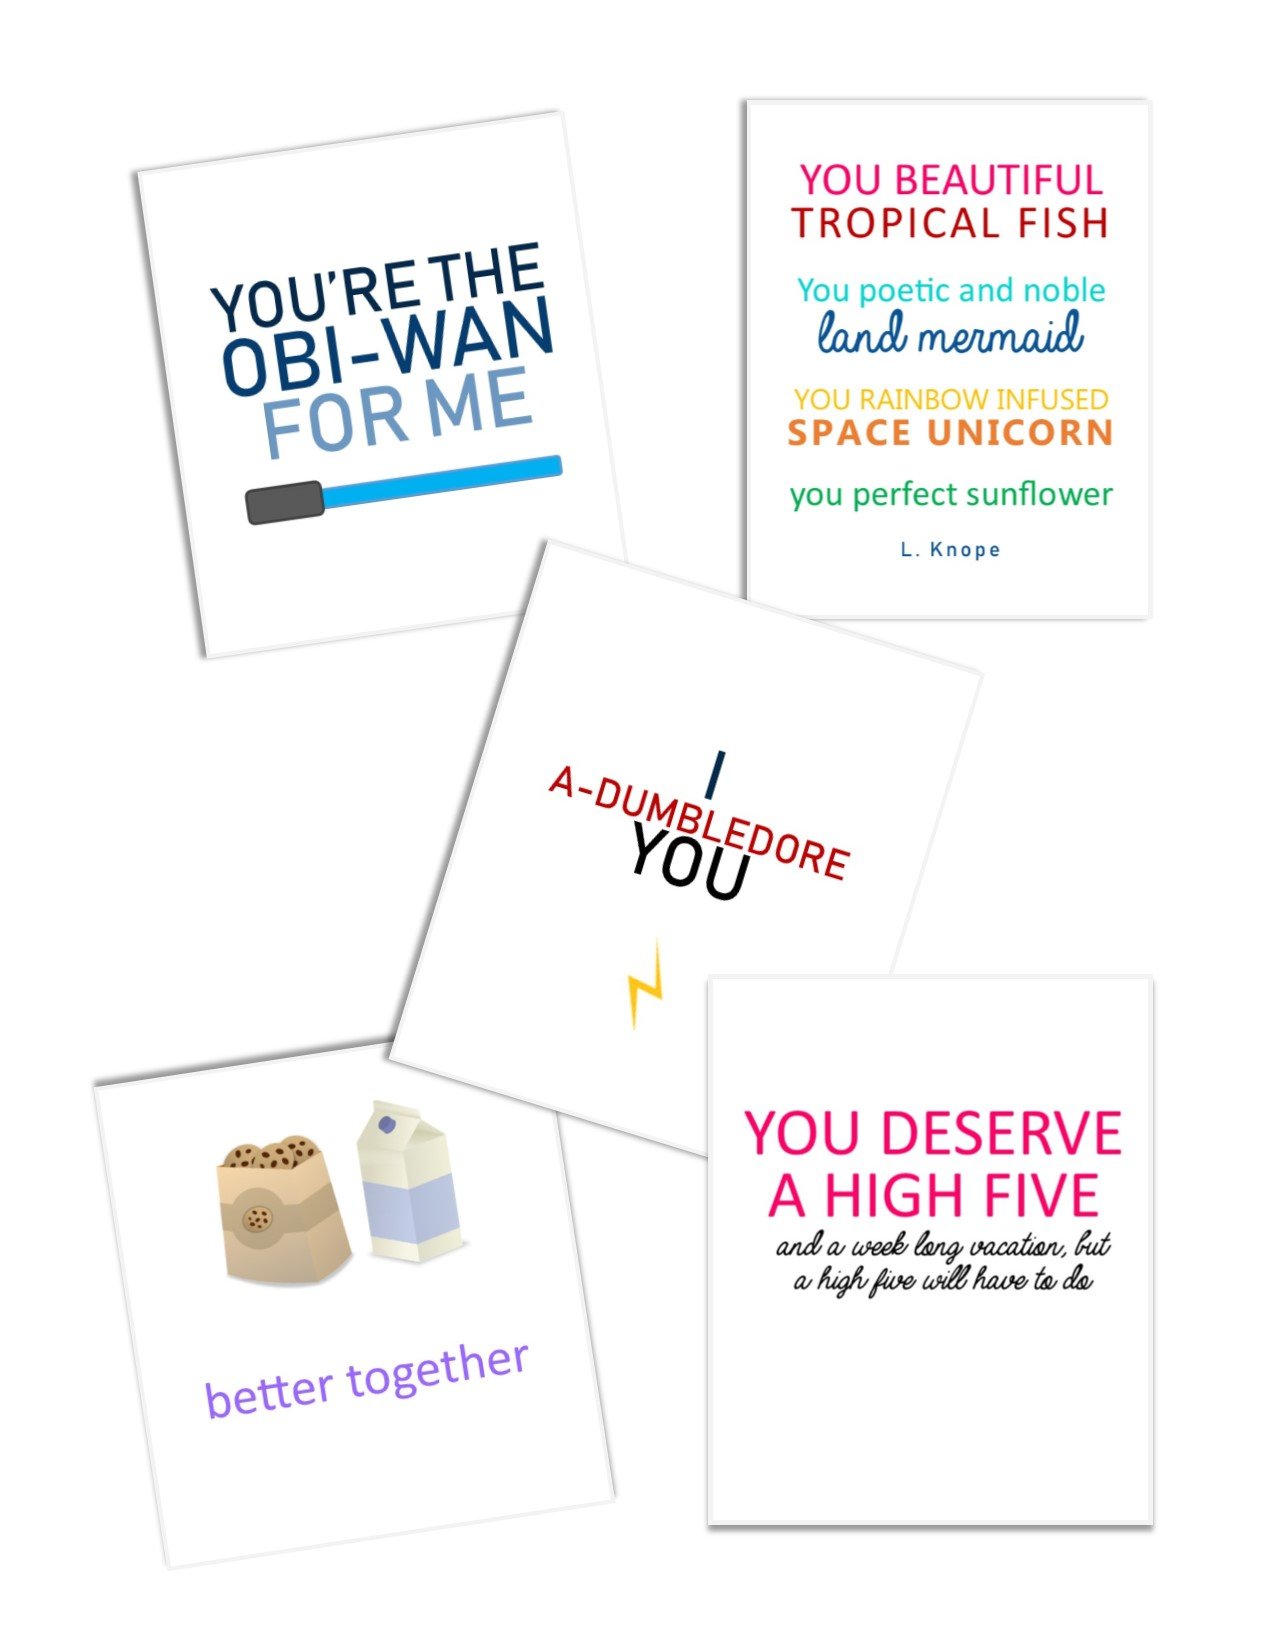 Free Printable Funny Valentine Cards to Give to Someone Special